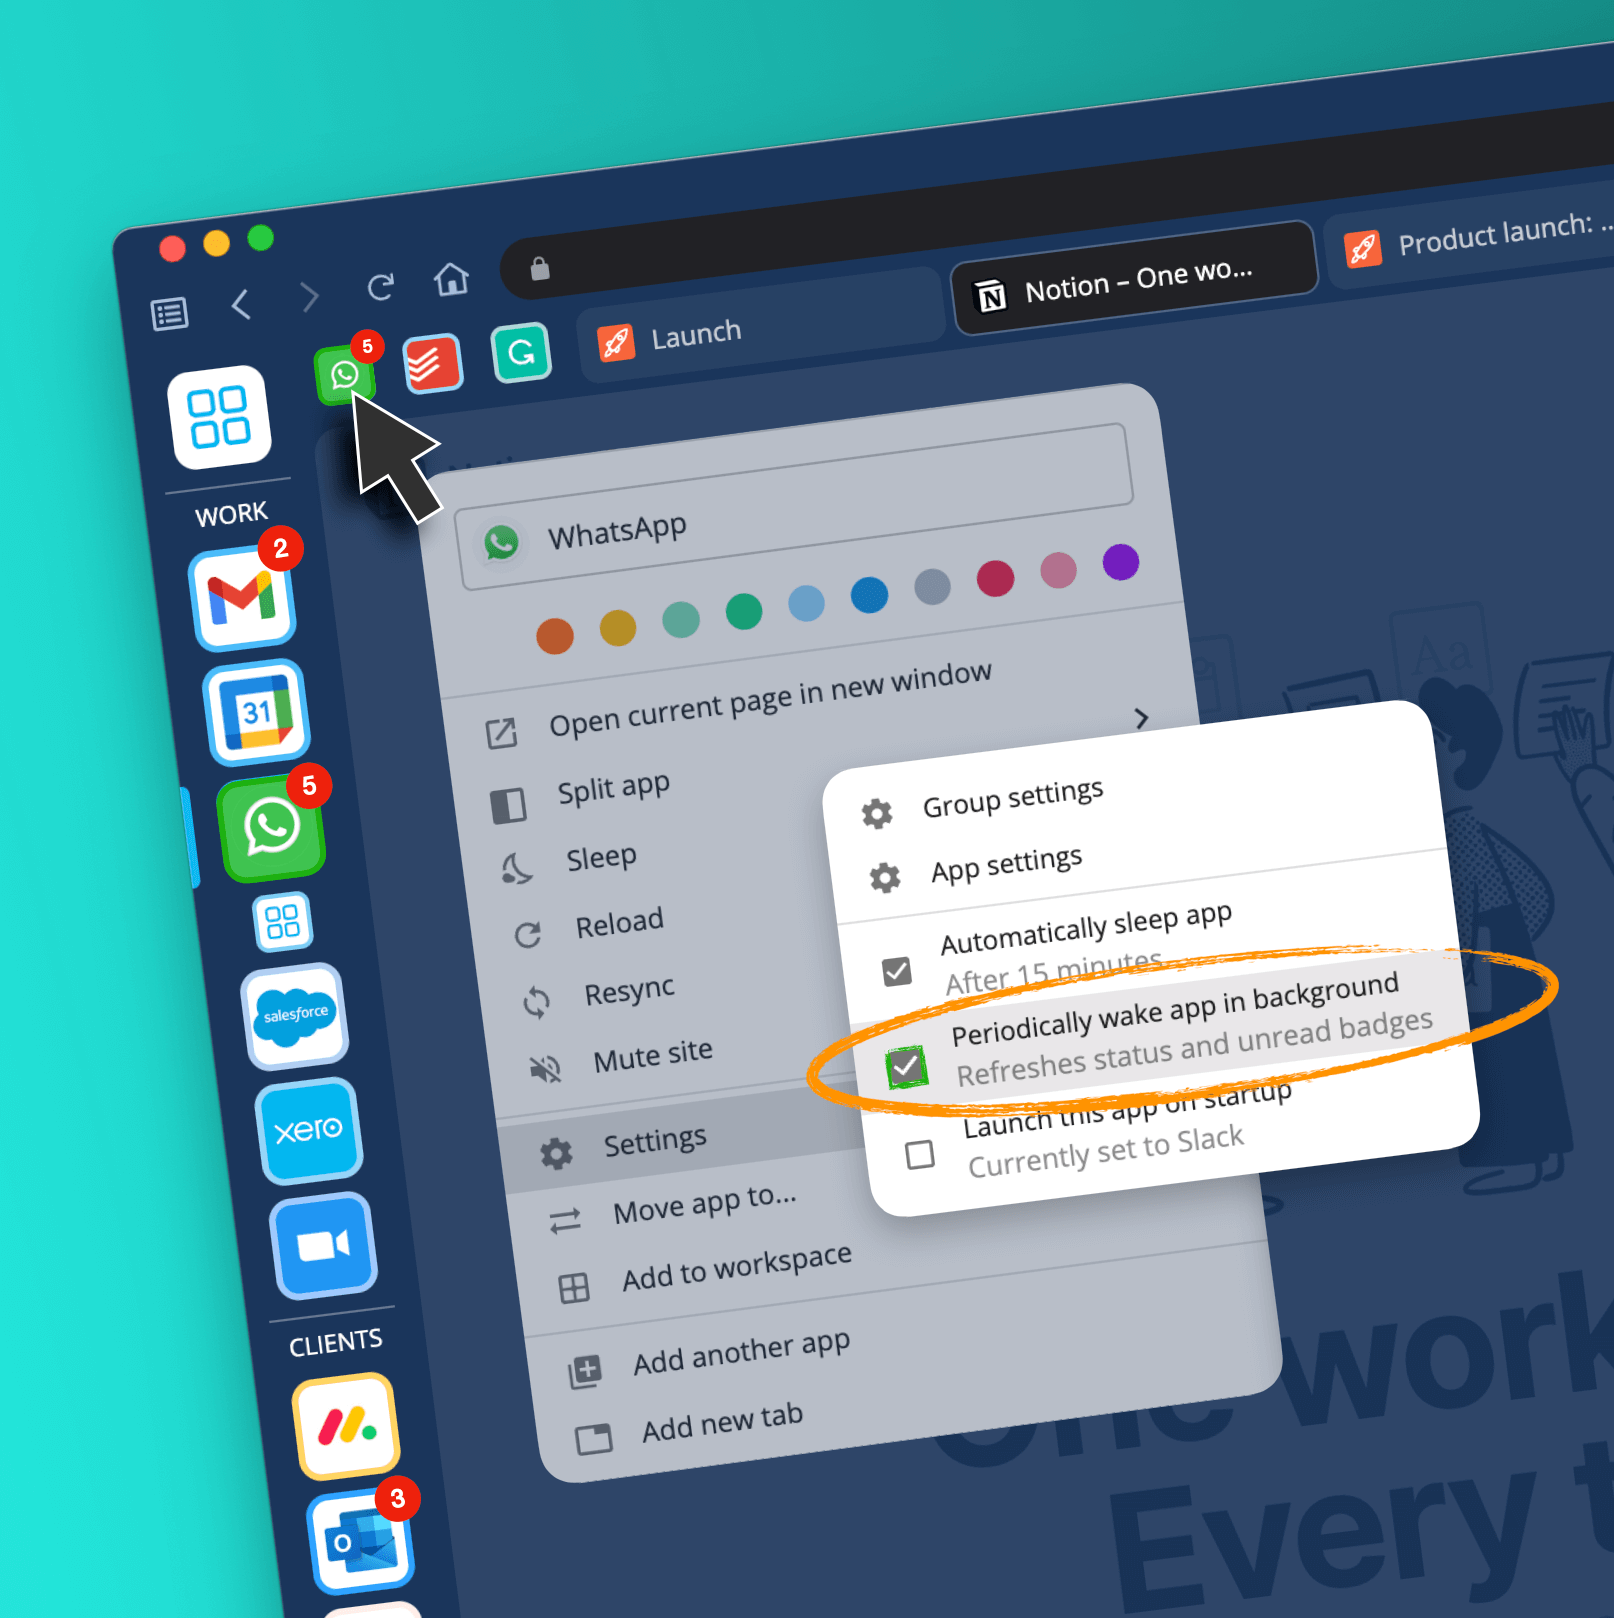 Refresh Unread Badges with new Auto-Wake Feature.